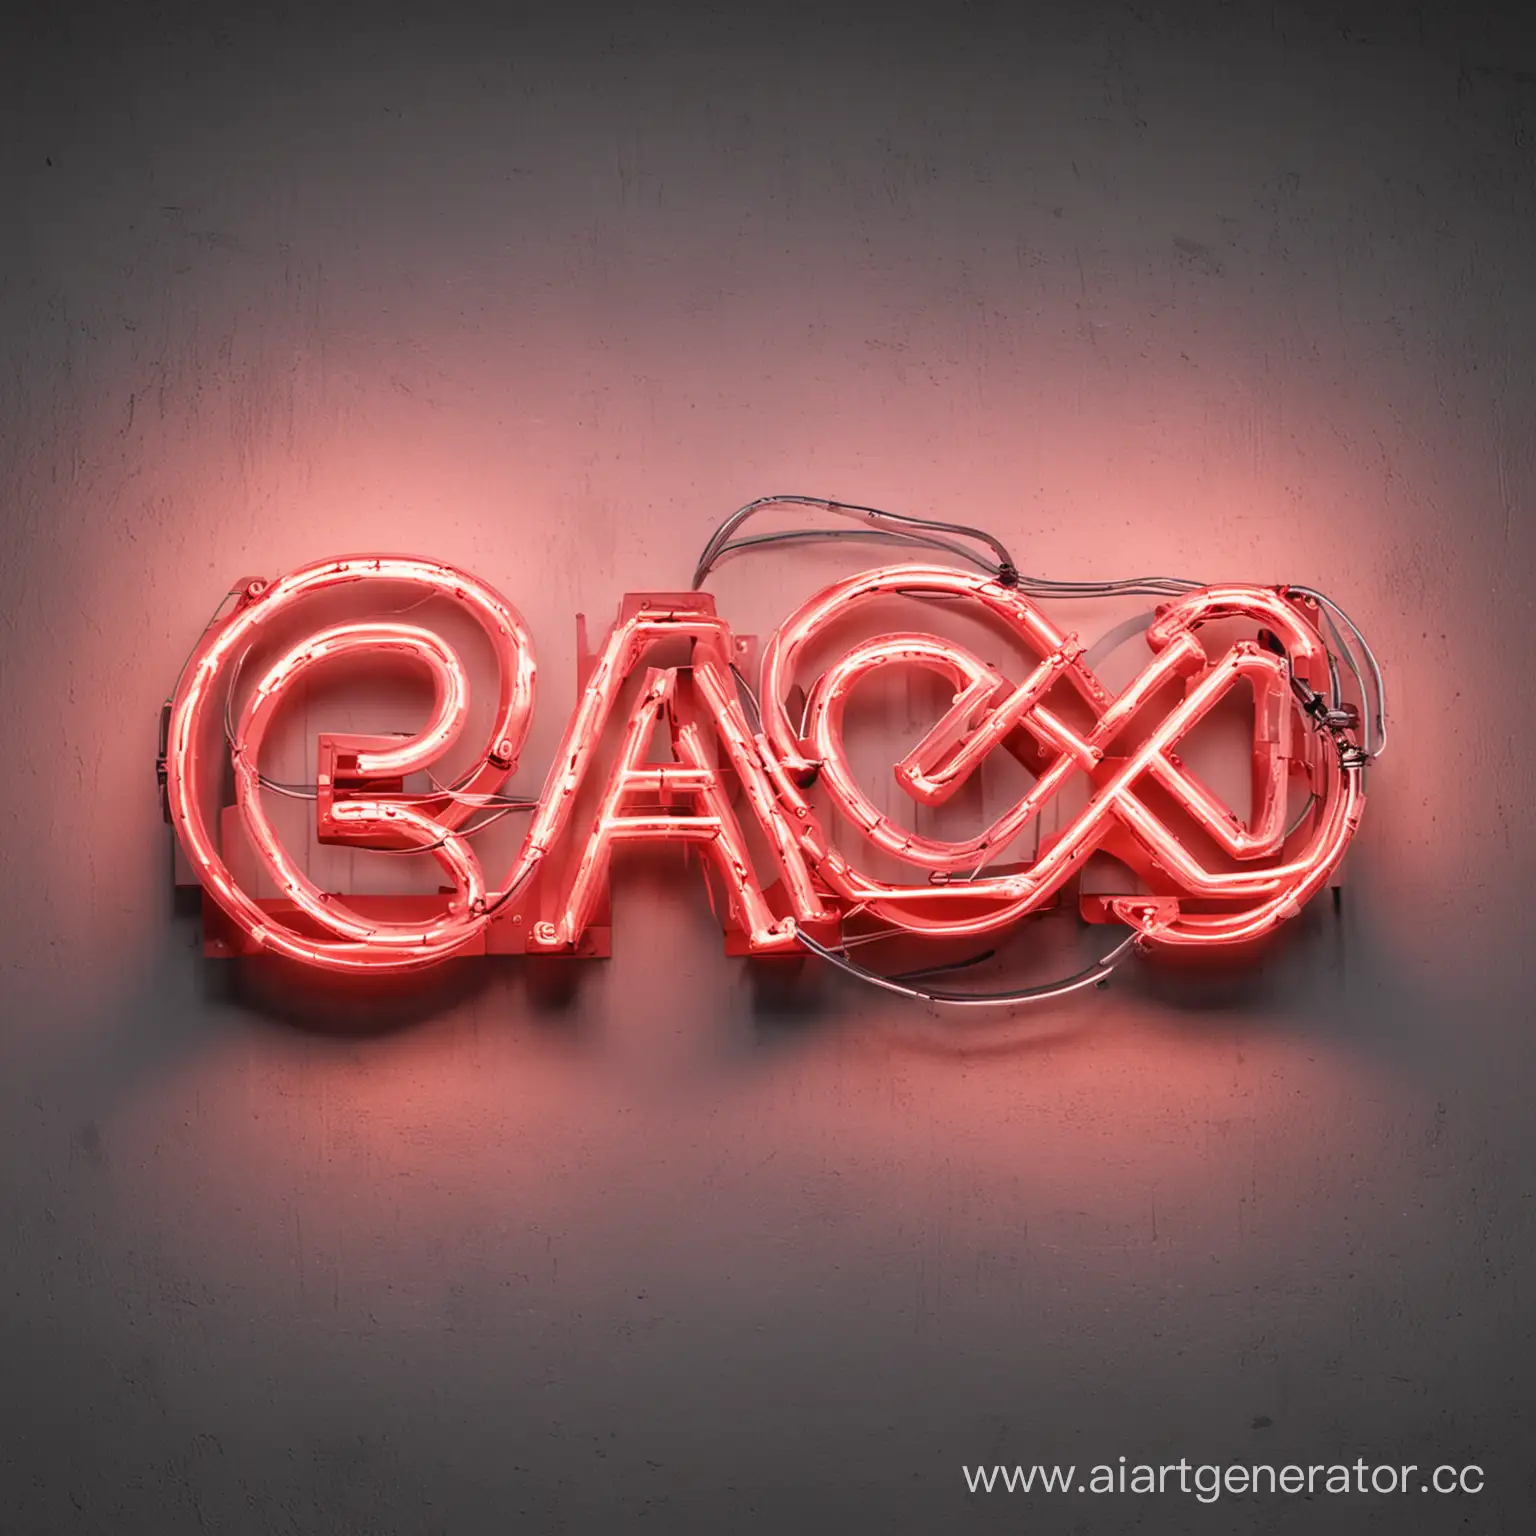 Vibrant-Neon-Sign-RA2X-Illuminated-in-Electrifying-Colors